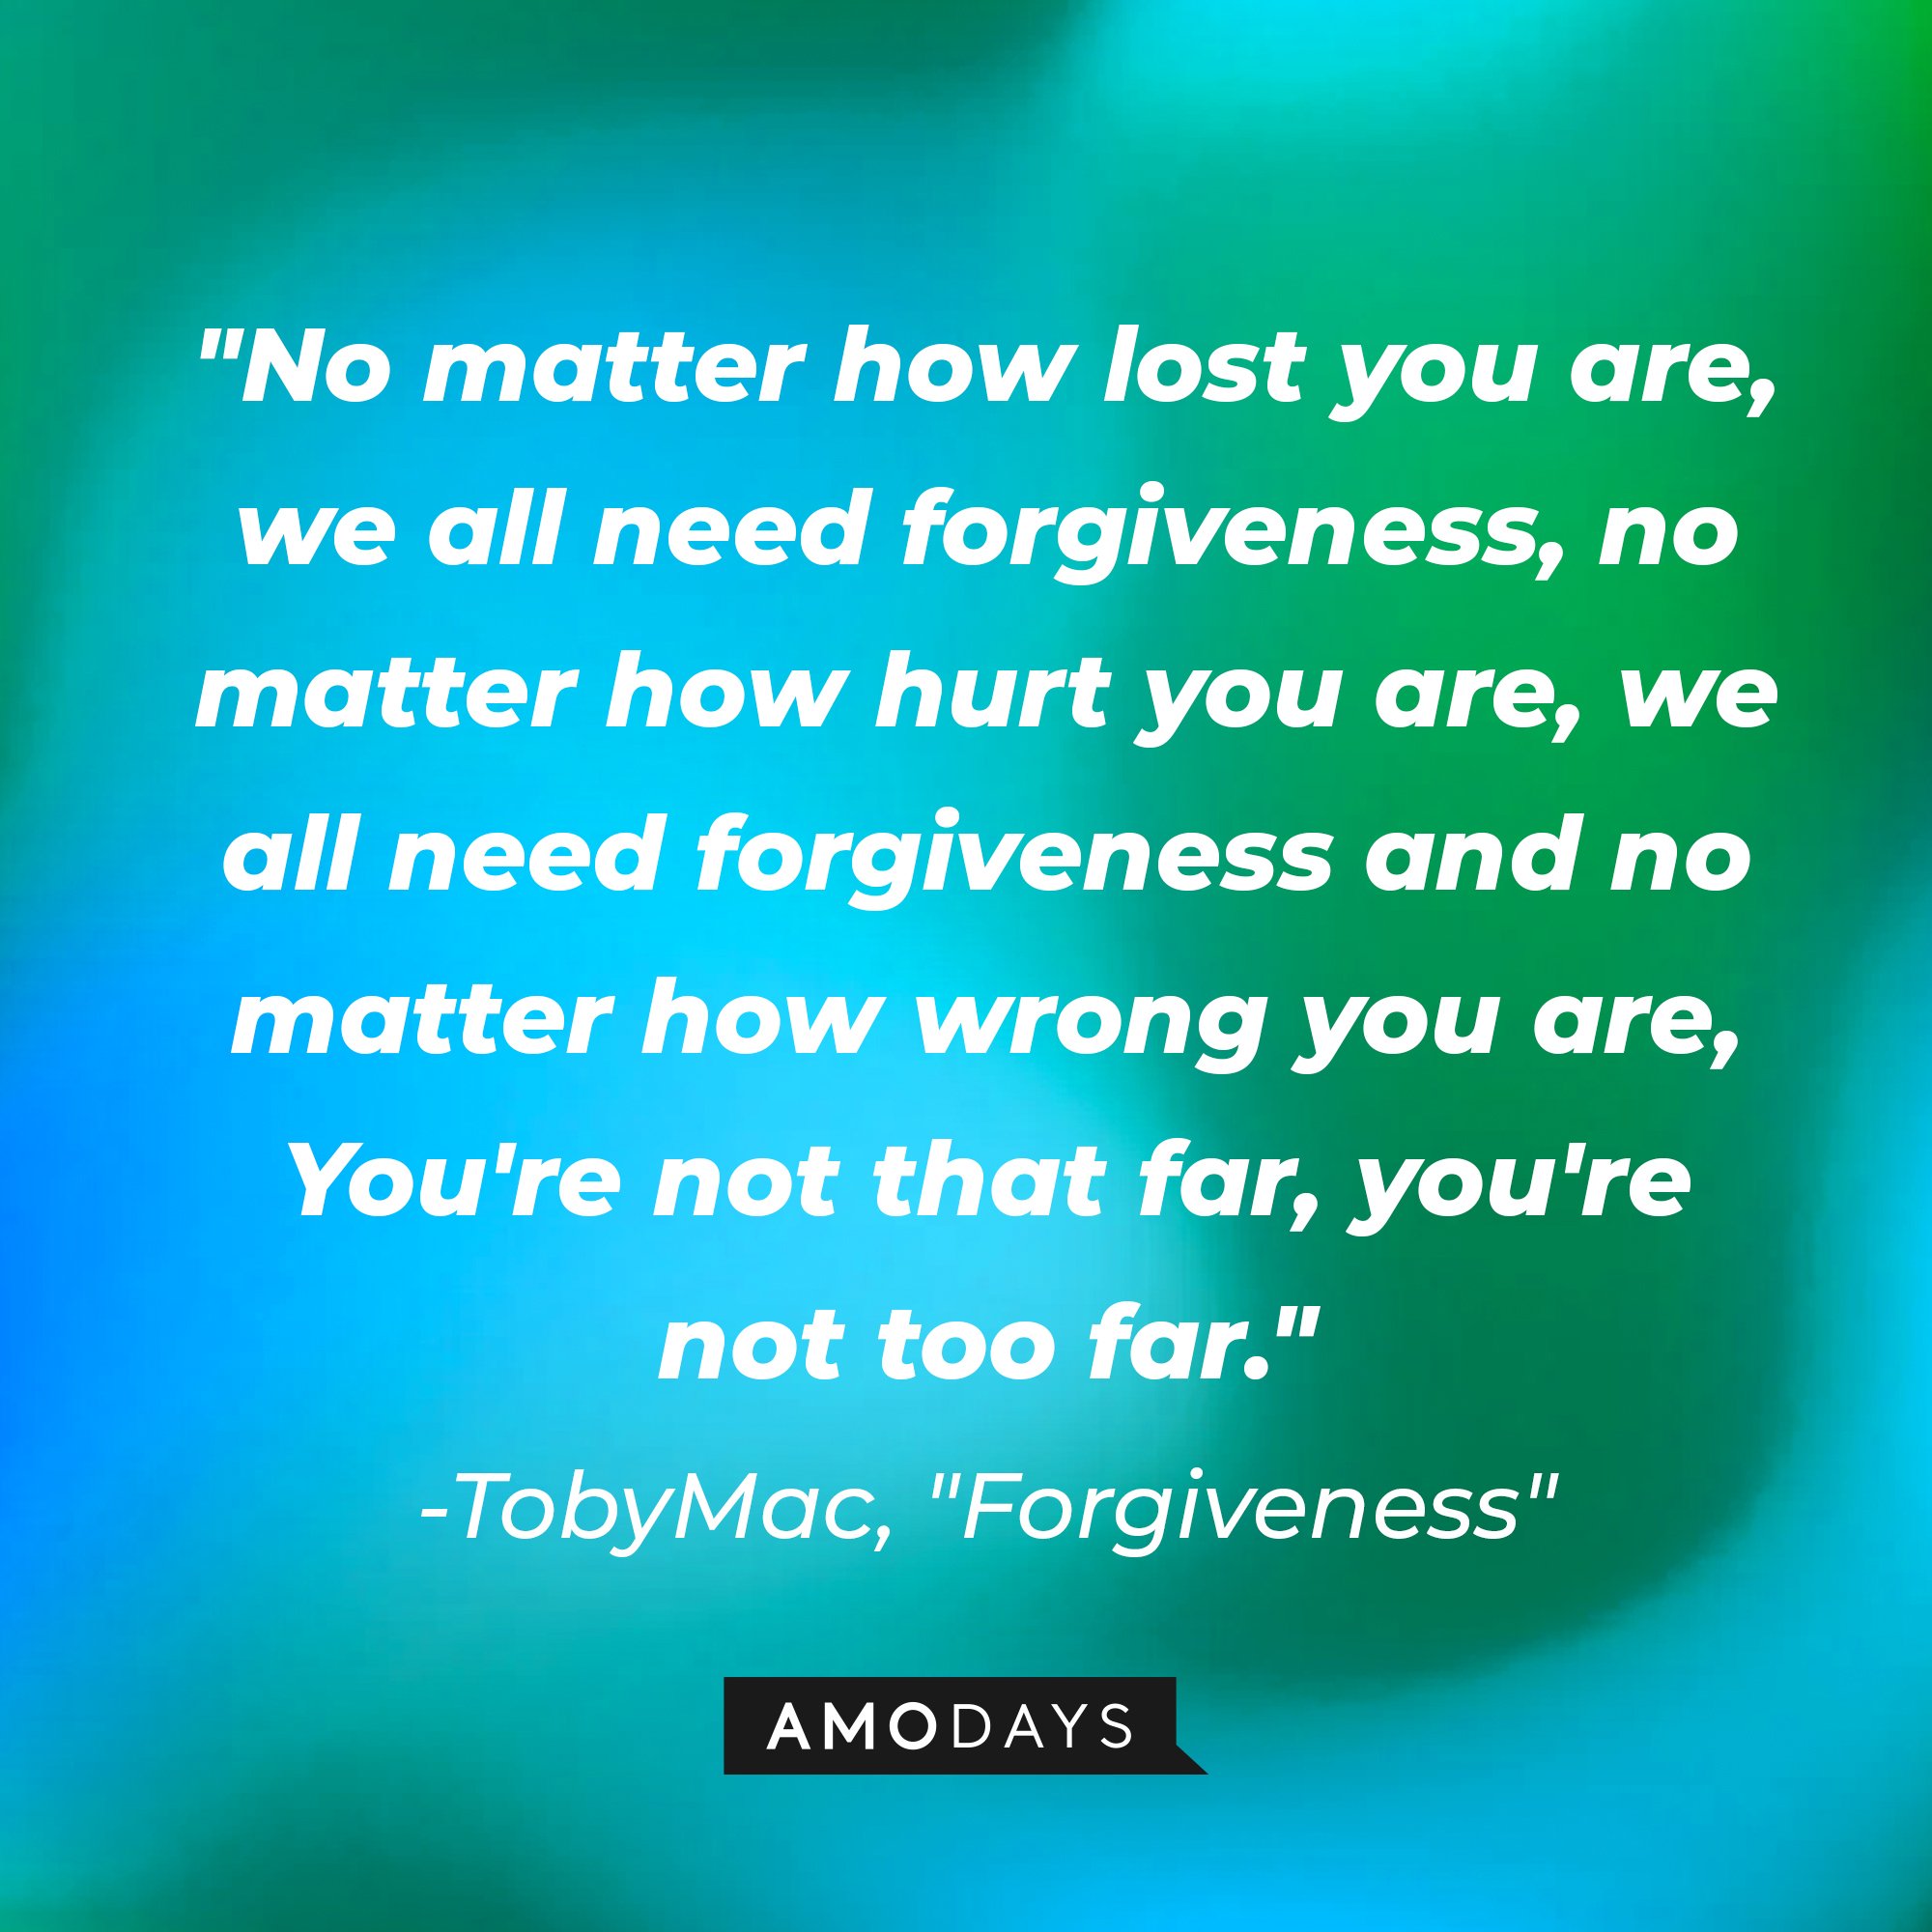 TobyMac's "Forgiveness" quote: "No matter how lost you are, we all need forgiveness, no matter how hurt you are, we all need forgiveness and no matter how wrong you are, You're not that far, you're not too far." | Image: AmoDays